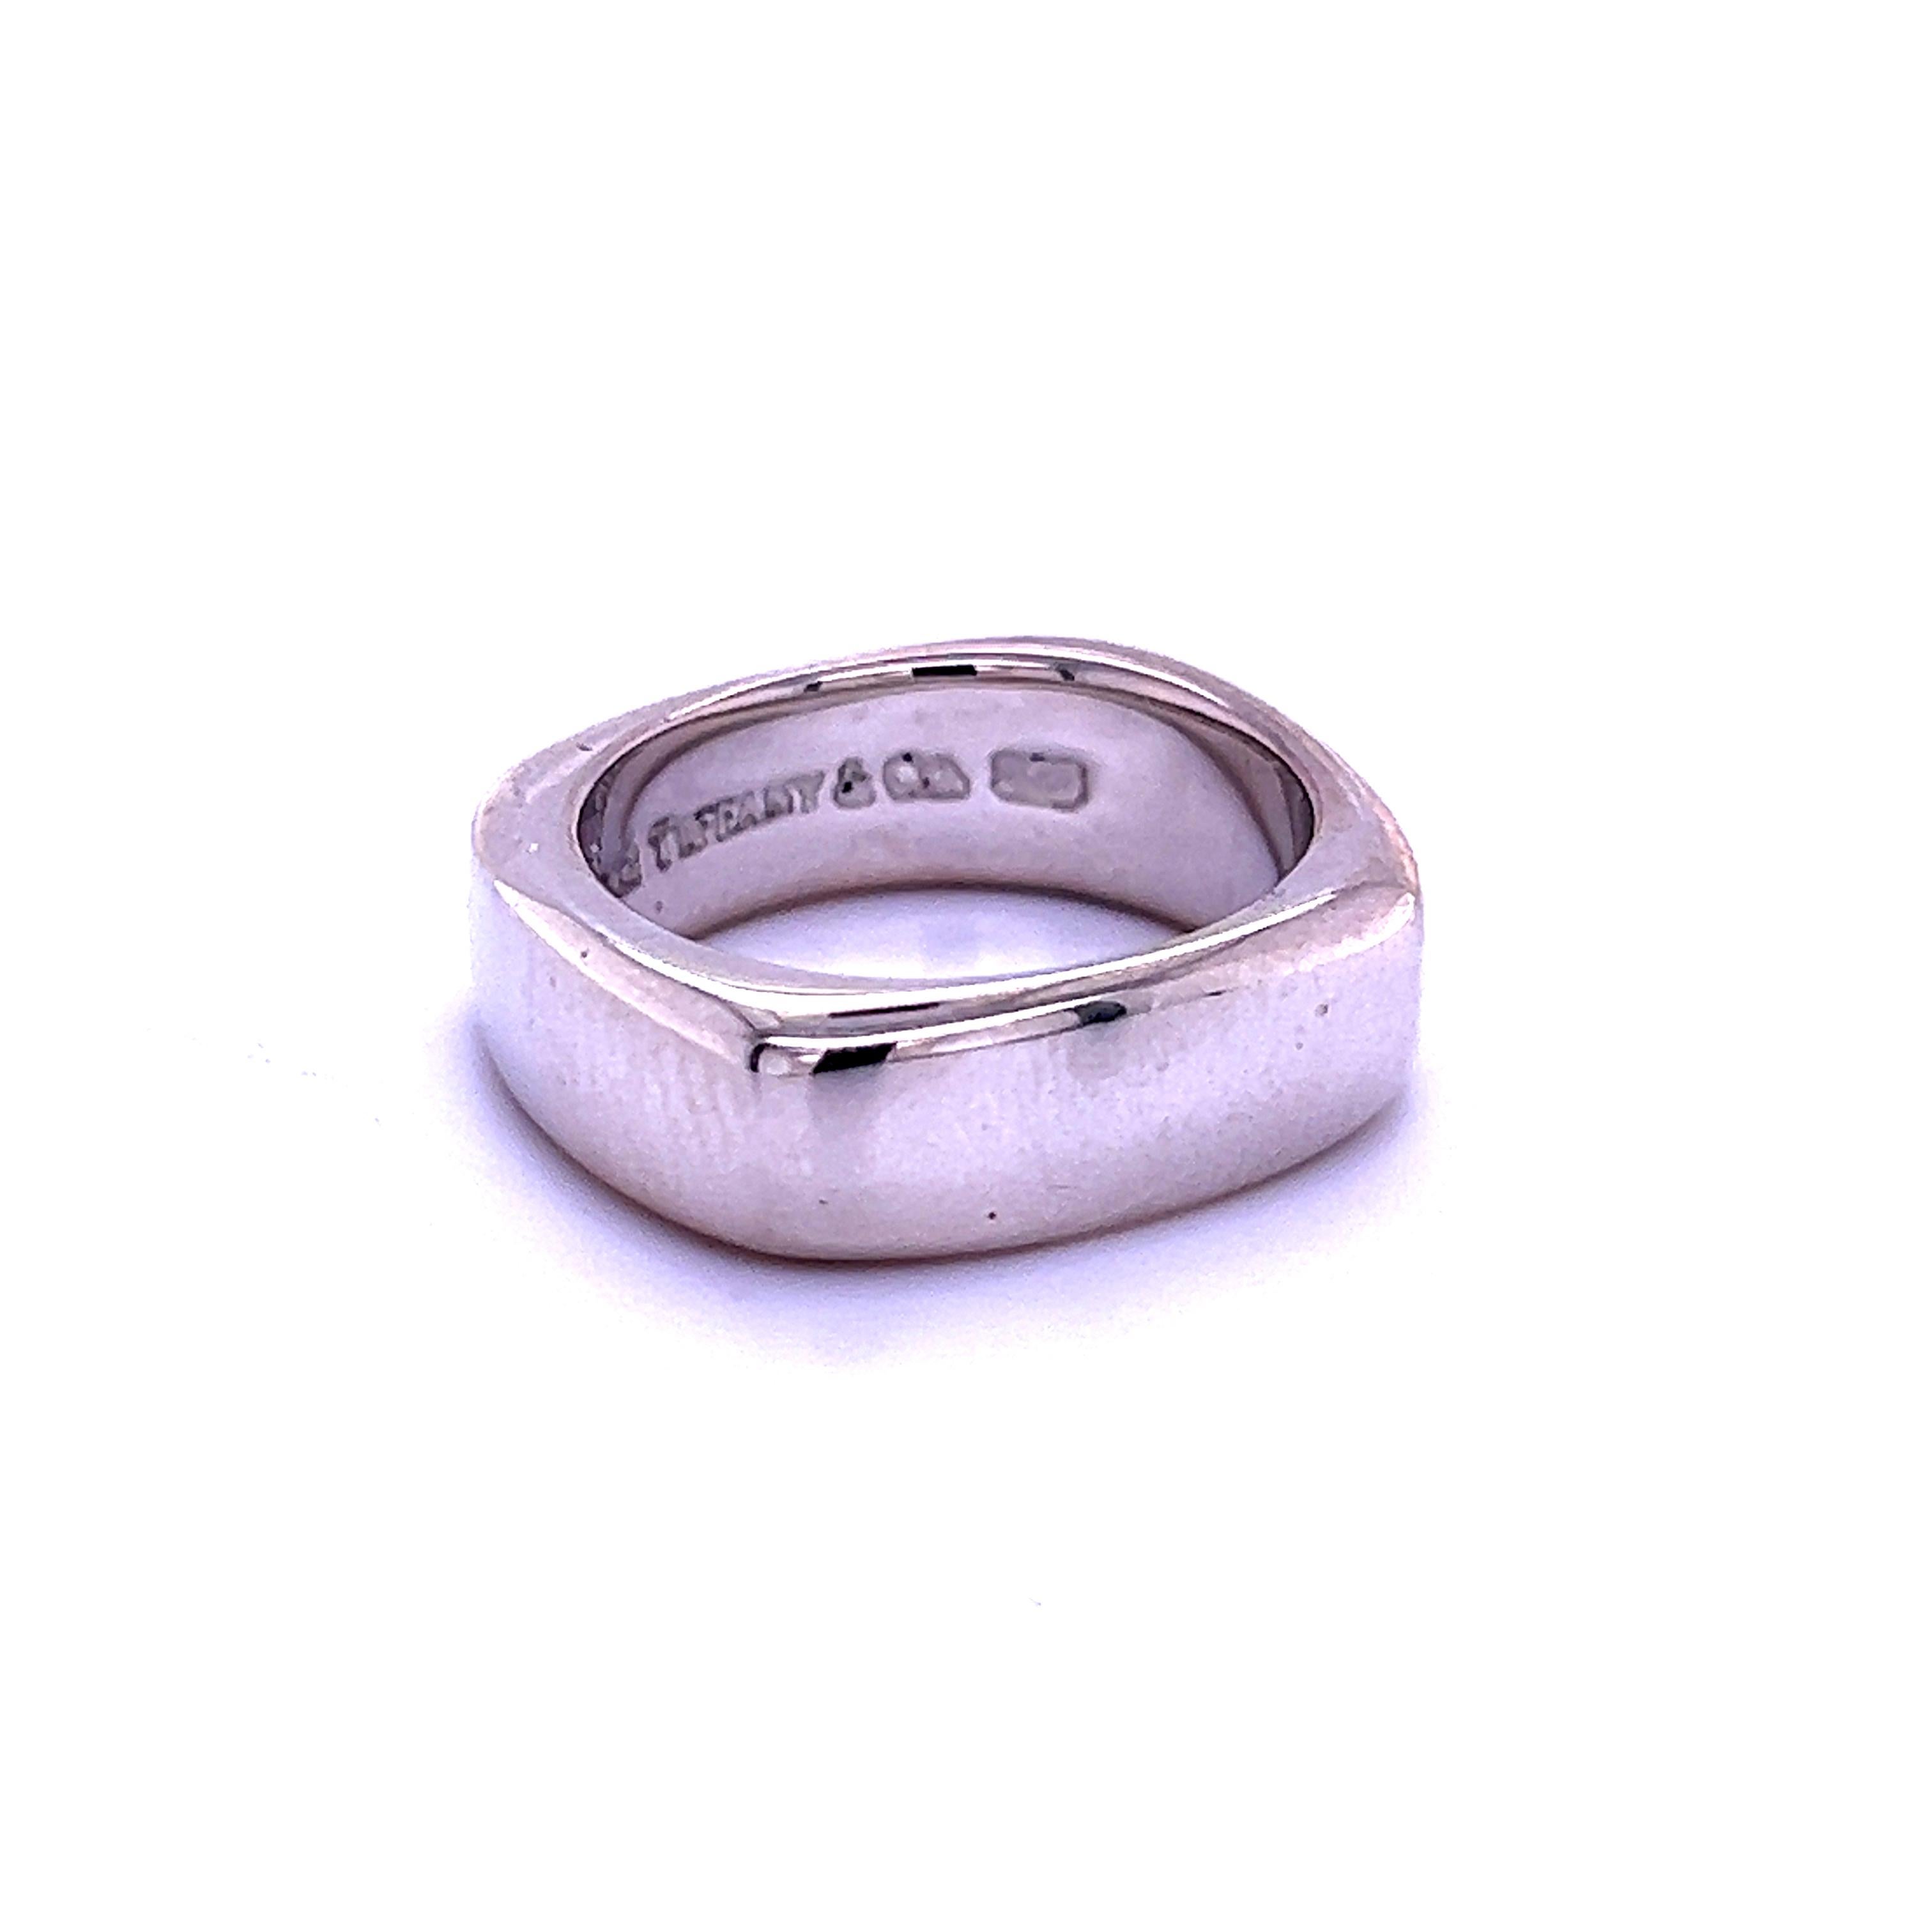 Tiffany & Co Estate Square Band Size 7 Silver 7 mm TIF510

TRUSTED SELLER SINCE 2002

DETAILS
Style: Square Band
Ring Size: 7
Height: 7 mm
Metal: Sterling Silver

We try to present our estate items as best as possible and most have been newly